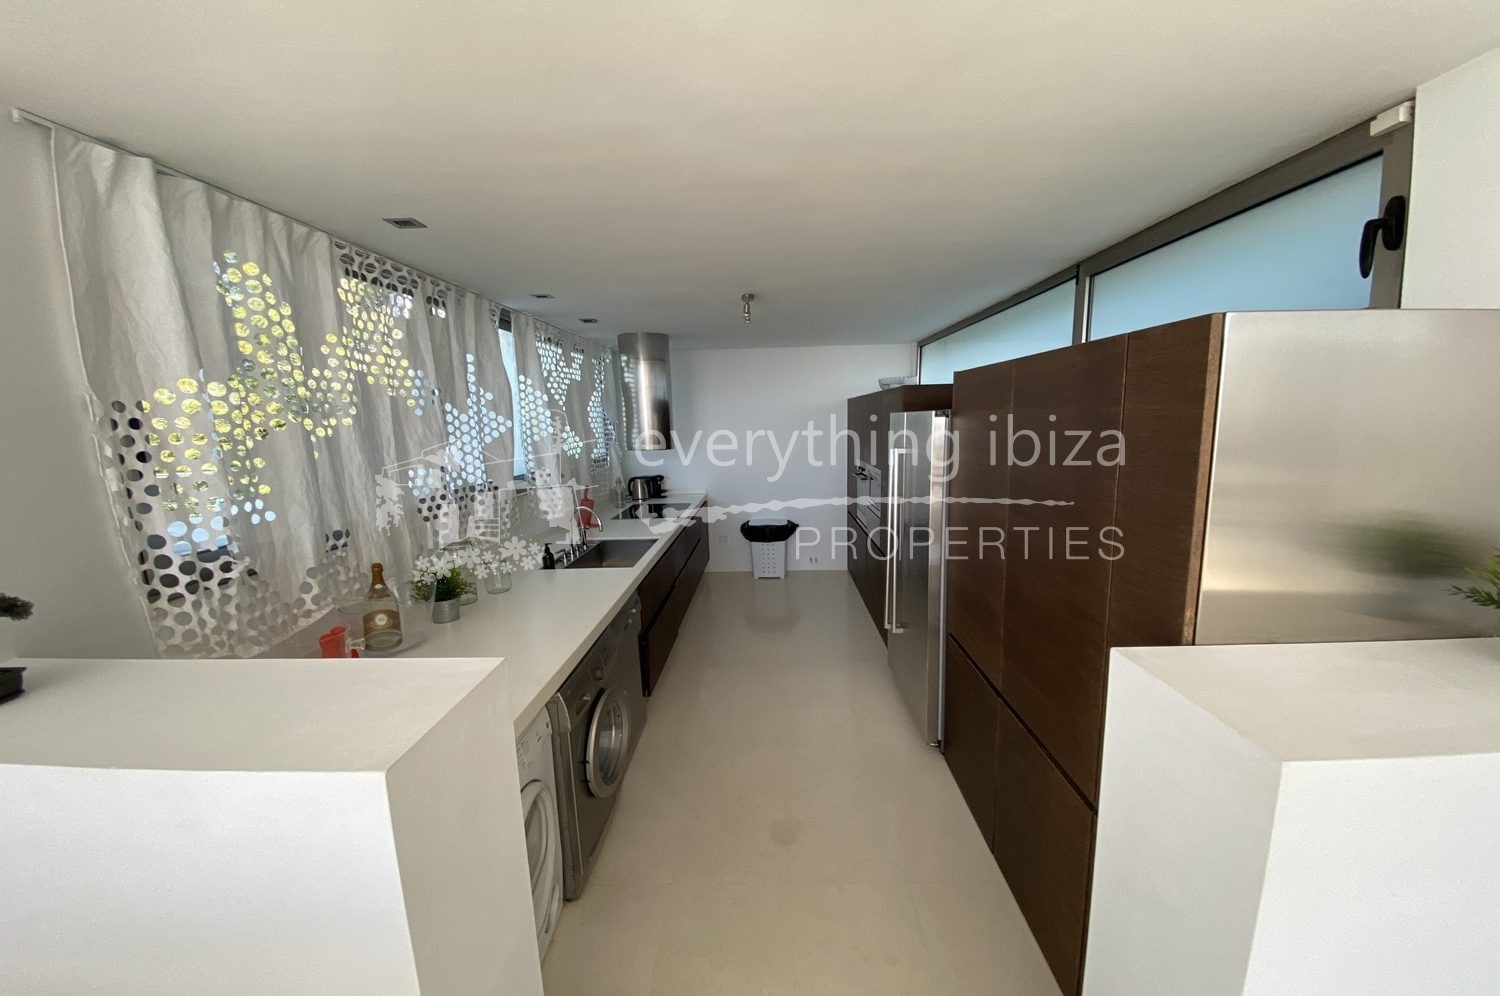 Modern villa with stunning views, ref. 1290, for sale in Ibiza by everything ibiza Properties